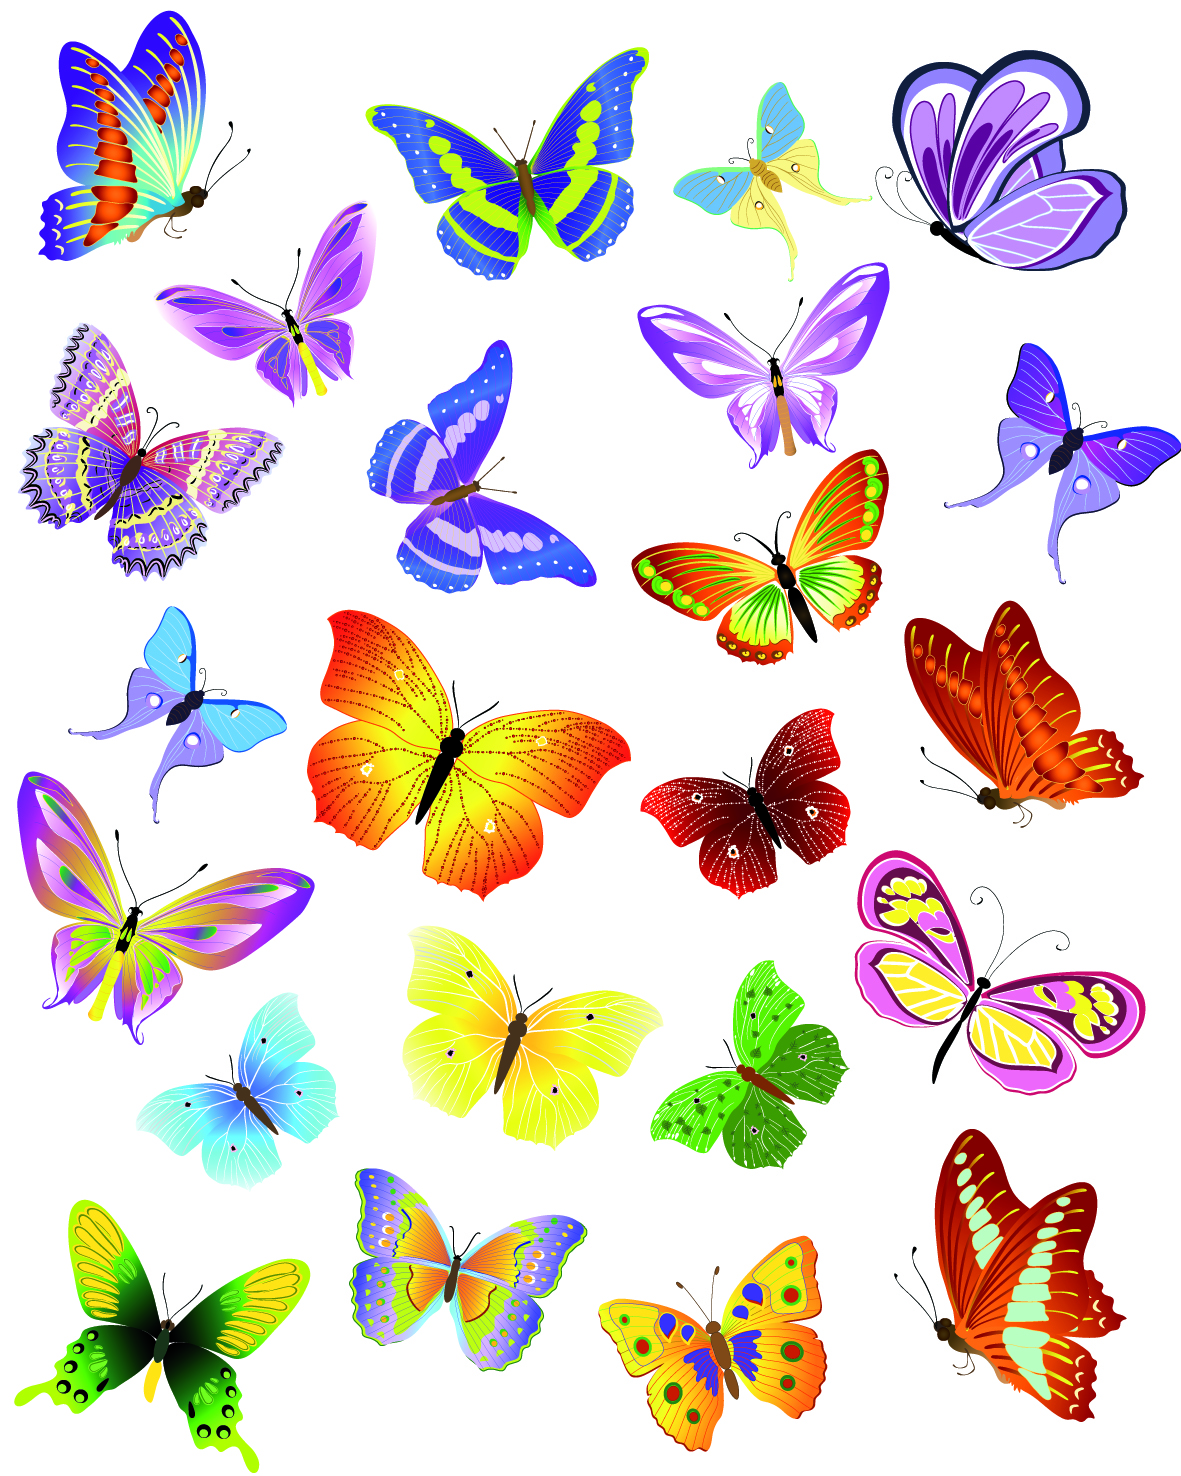 Butterfly Vector Free - ClipArt Best